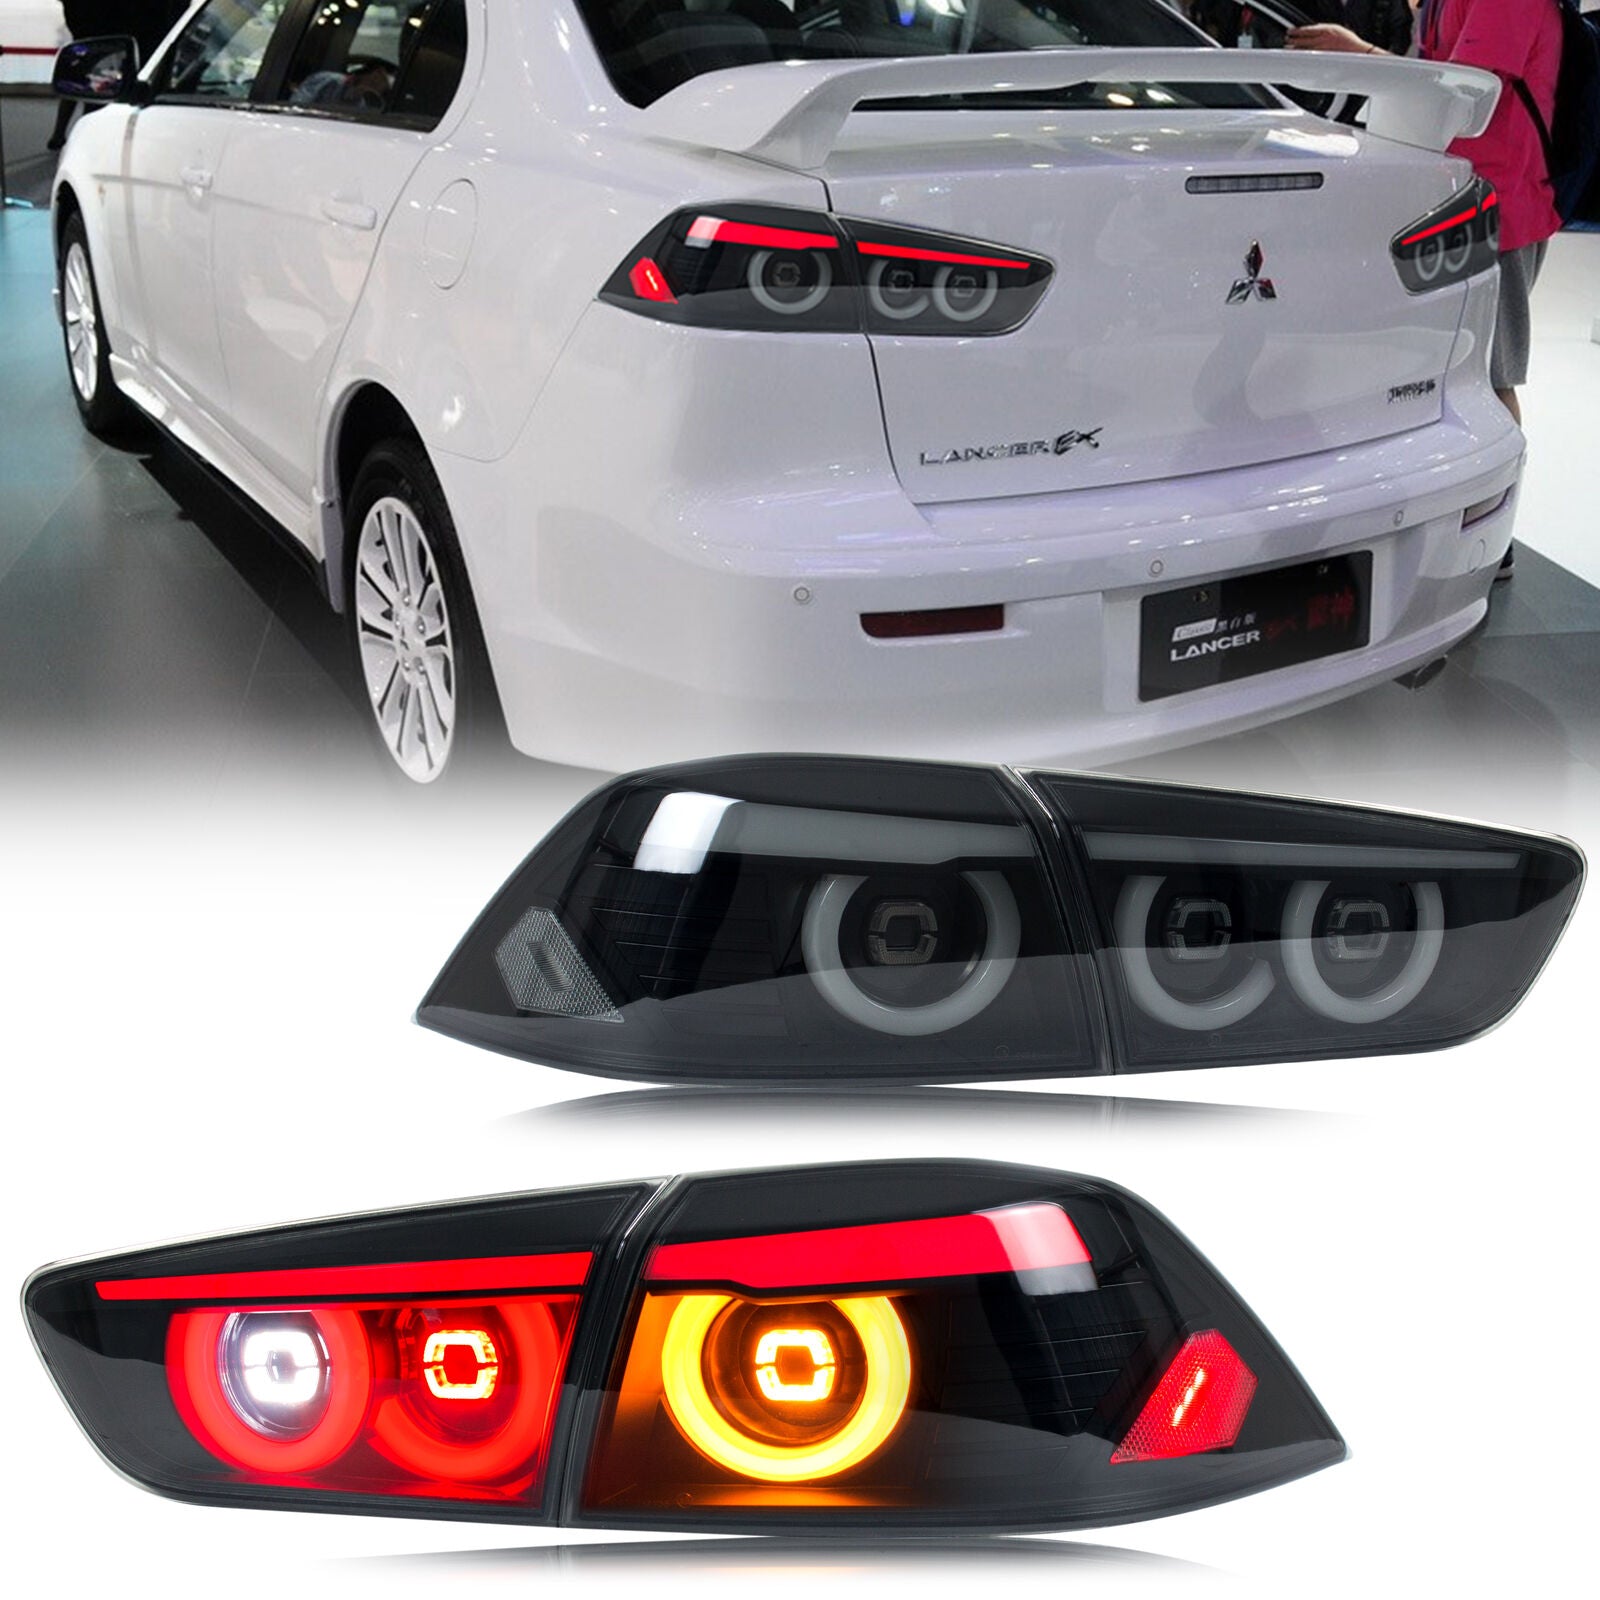 inginuity time LED JDM Tail Lights for Mitsubishi Lancer 2009-2021 EVO X  Start-up Animation Sequential Turn Signal Rear Lamps Assembly